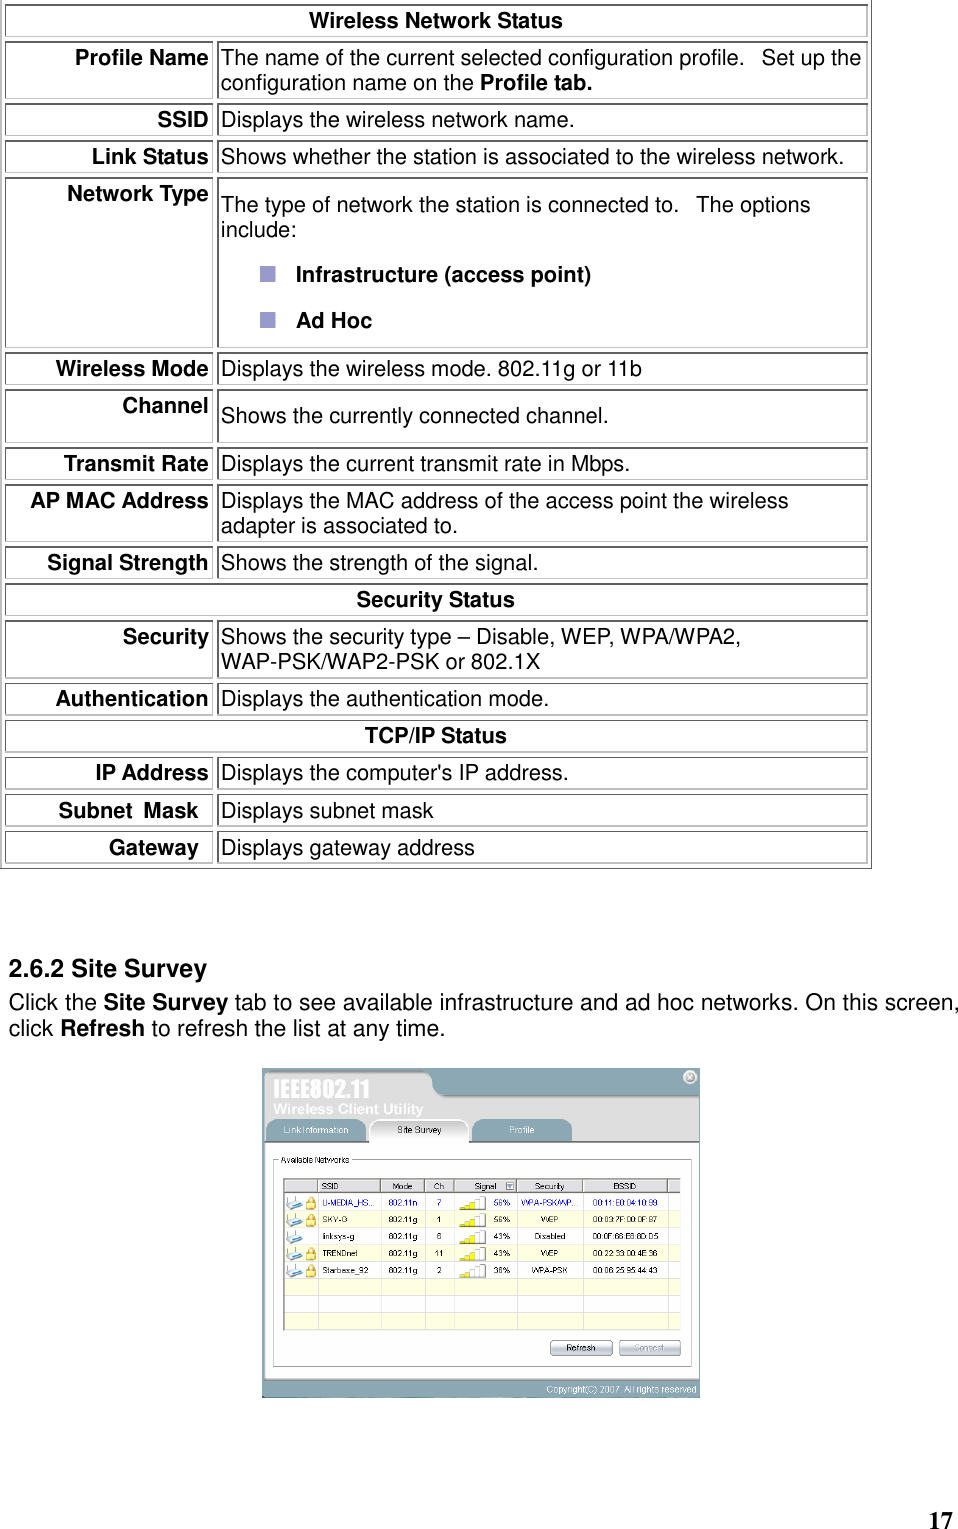  17 Wireless Network Status Profile Name The name of the current selected configuration profile.   Set up the configuration name on the Profile tab. SSID Displays the wireless network name.    Link Status Shows whether the station is associated to the wireless network.  Network Type The type of network the station is connected to.   The options include:    Infrastructure (access point)    Ad Hoc   Wireless Mode Displays the wireless mode. 802.11g or 11b Channel Shows the currently connected channel. Transmit Rate Displays the current transmit rate in Mbps. AP MAC Address Displays the MAC address of the access point the wireless adapter is associated to. Signal Strength Shows the strength of the signal.  Security Status Security Shows the security type – Disable, WEP, WPA/WPA2, WAP-PSK/WAP2-PSK or 802.1X Authentication Displays the authentication mode.     TCP/IP Status IP Address Displays the computer&apos;s IP address.   Subnet  Mask Displays subnet mask   Gateway Displays gateway address  2.6.2 Site Survey Click the Site Survey tab to see available infrastructure and ad hoc networks. On this screen, click Refresh to refresh the list at any time.        